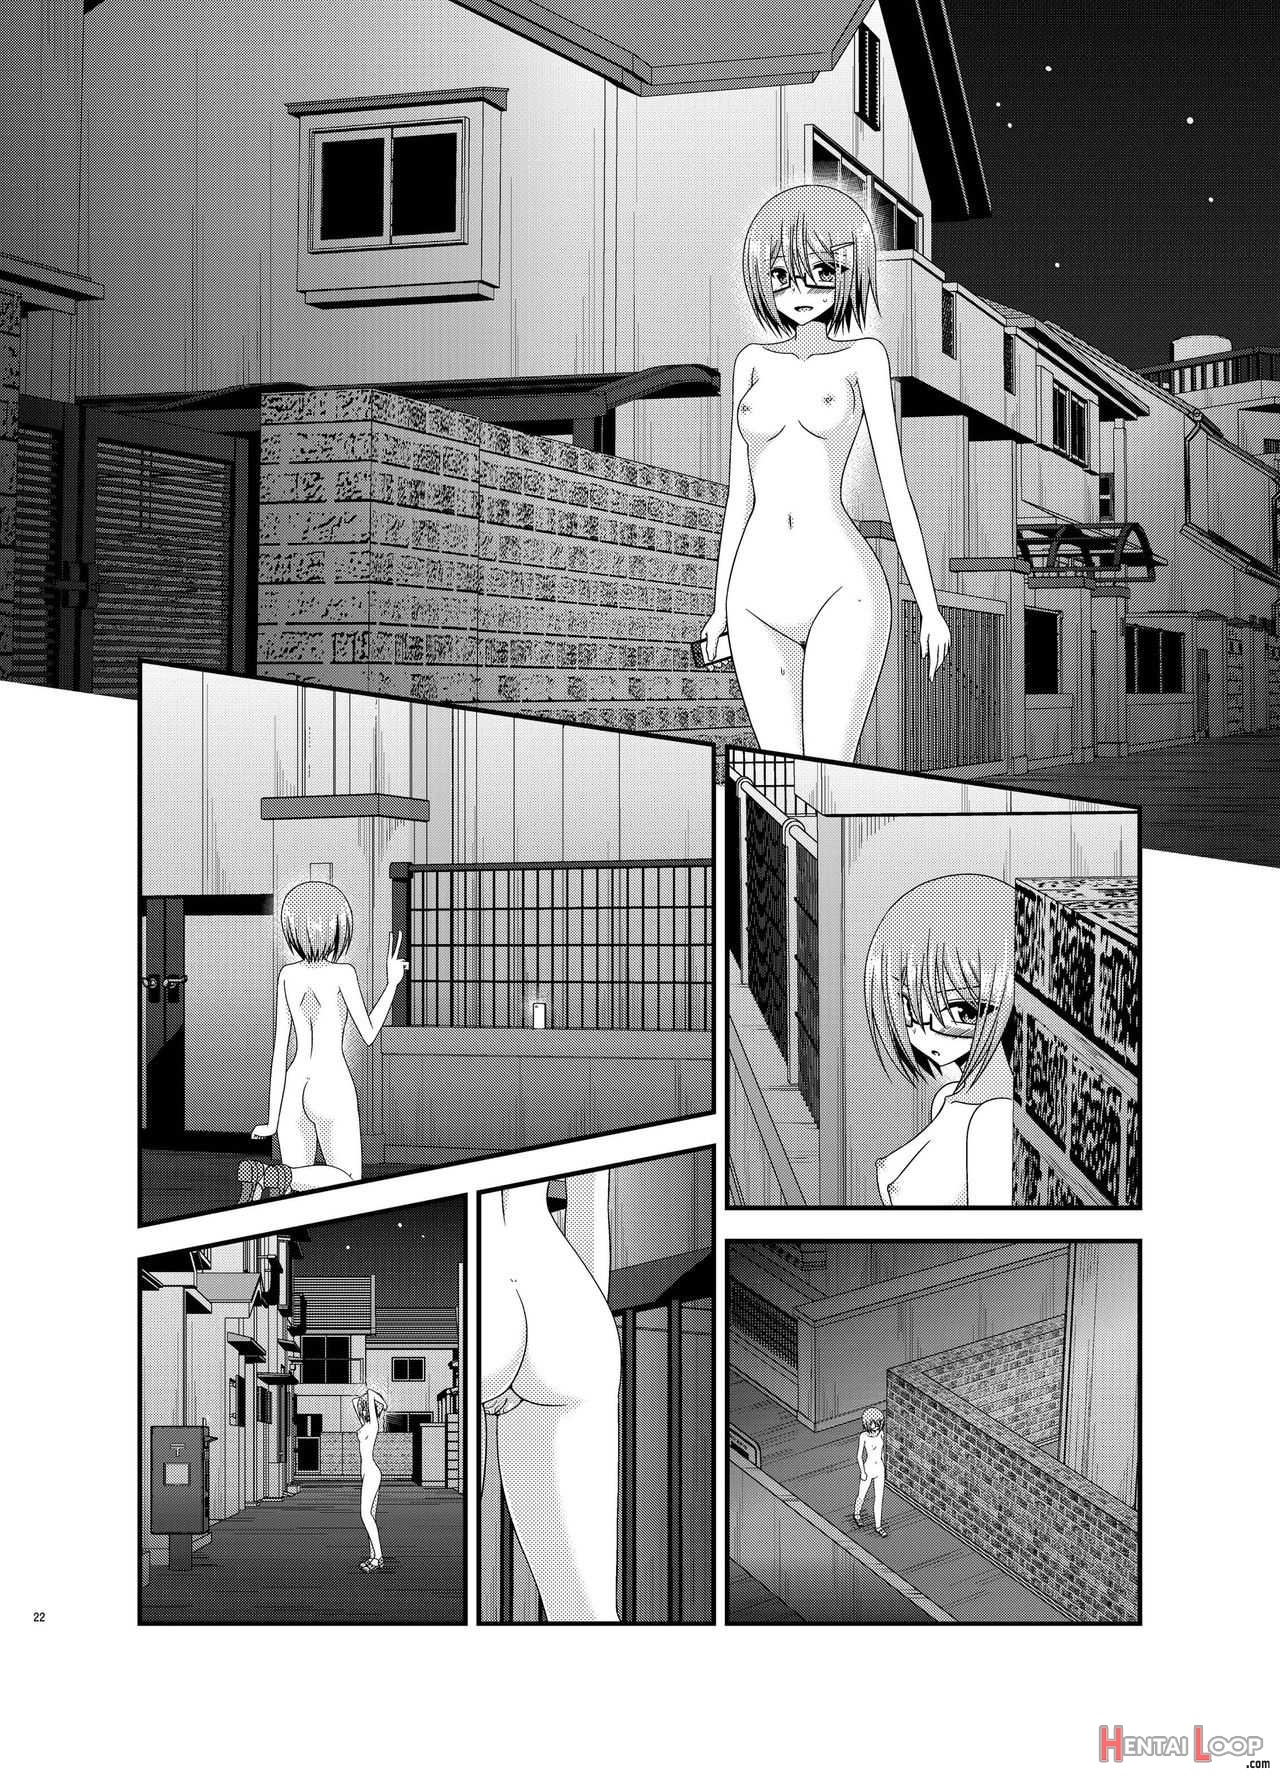 Exhibitionist Girl Diary Chapter 11 page 22